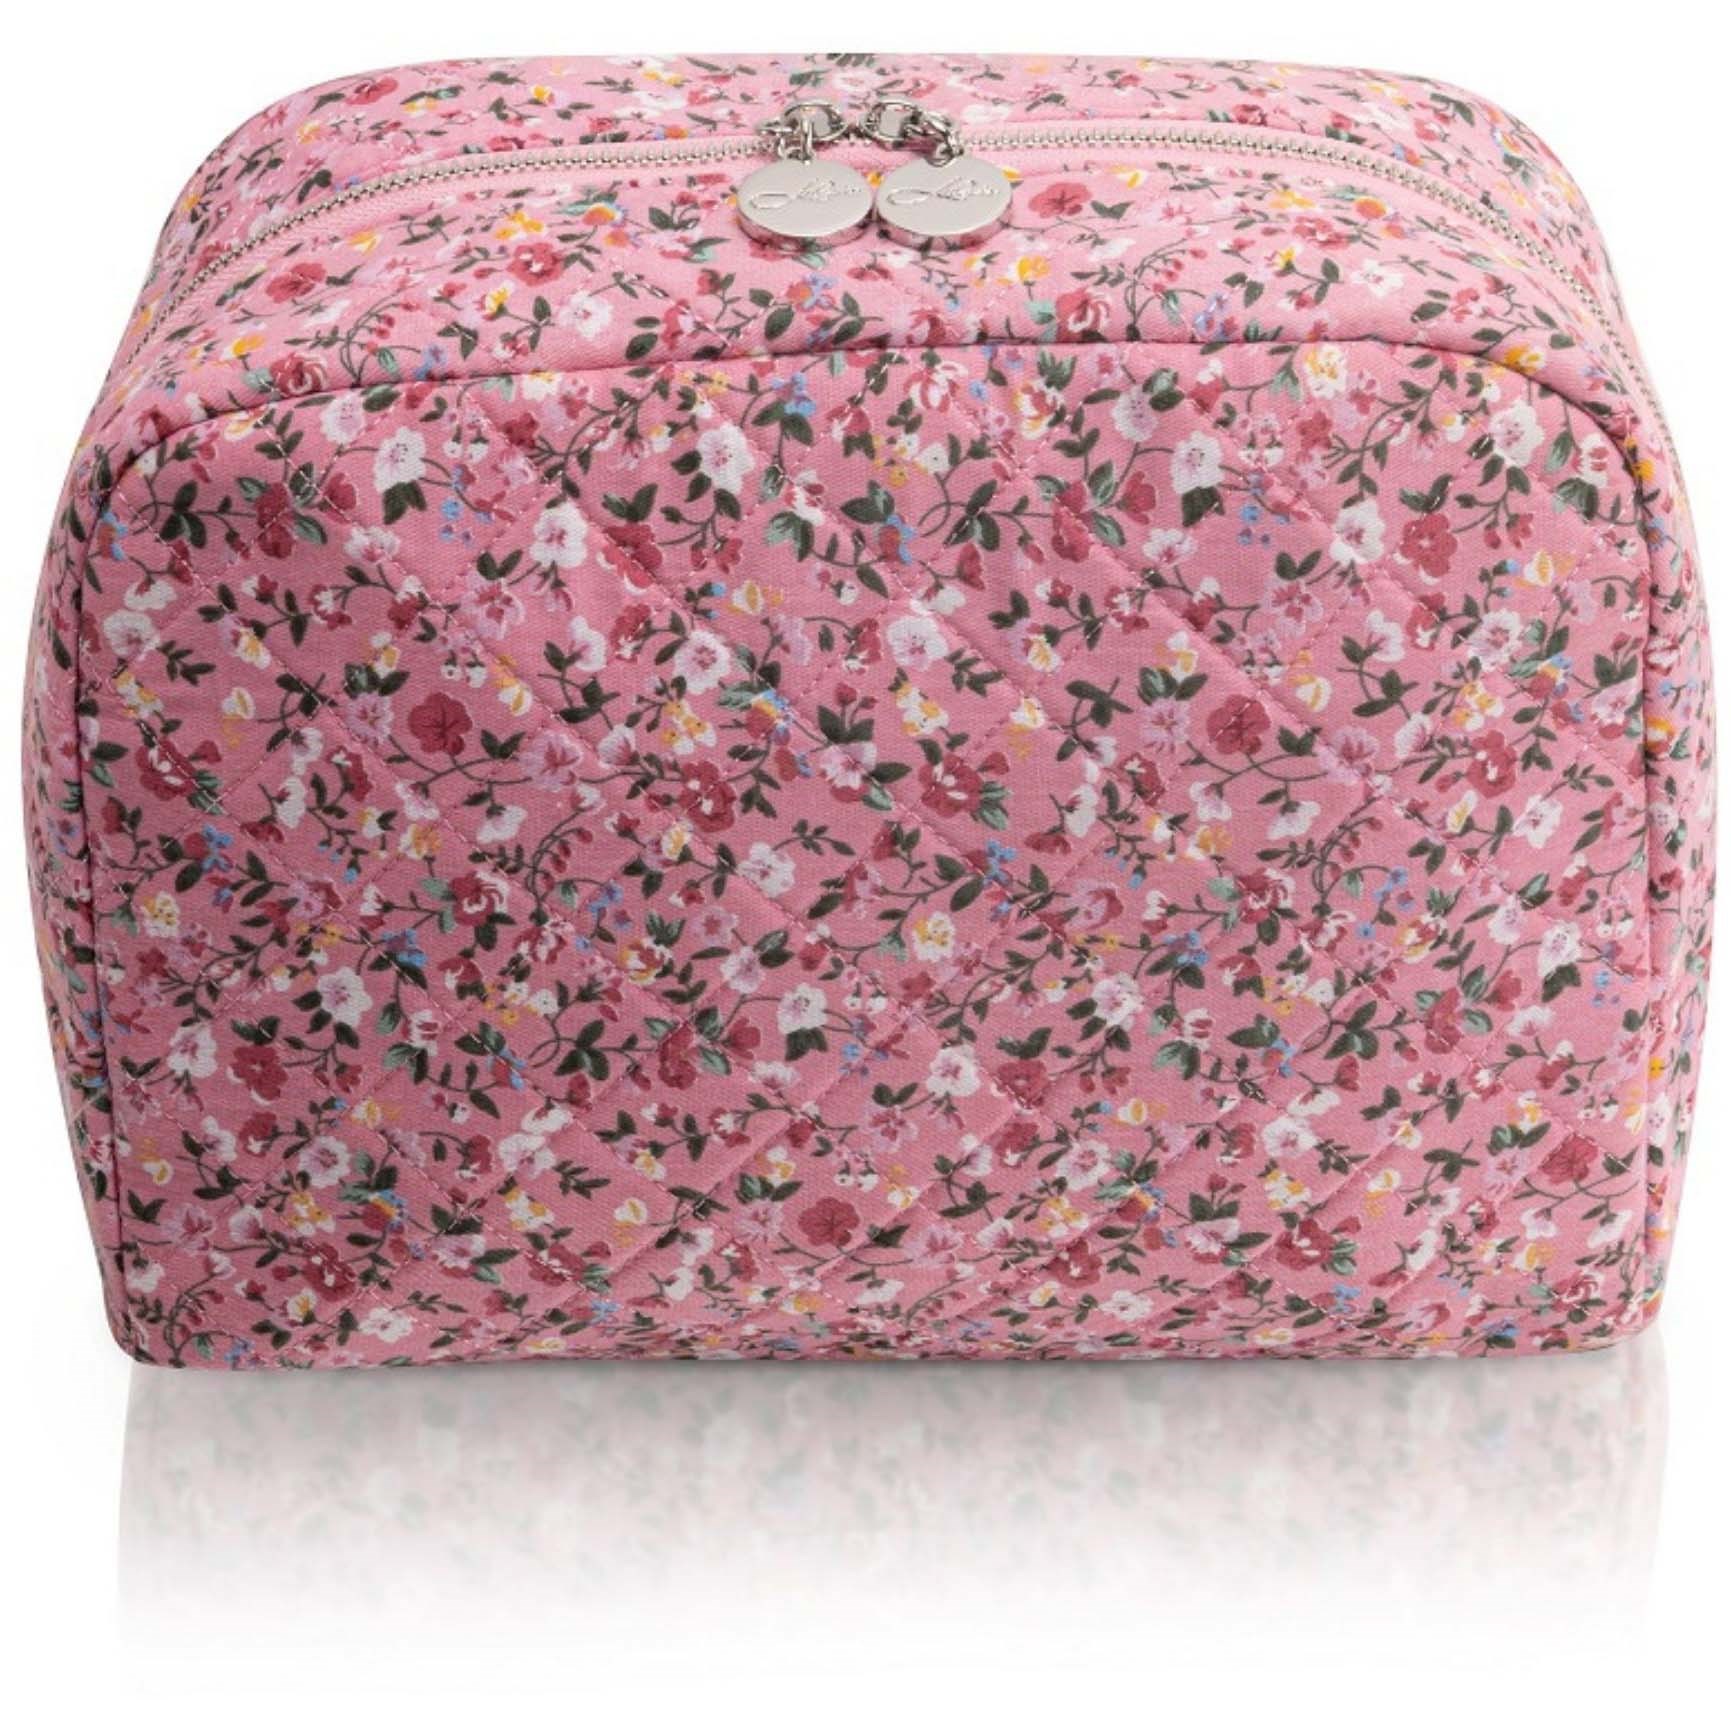 LULUS ACCESSORIES Toiletry Bag Floral Rose